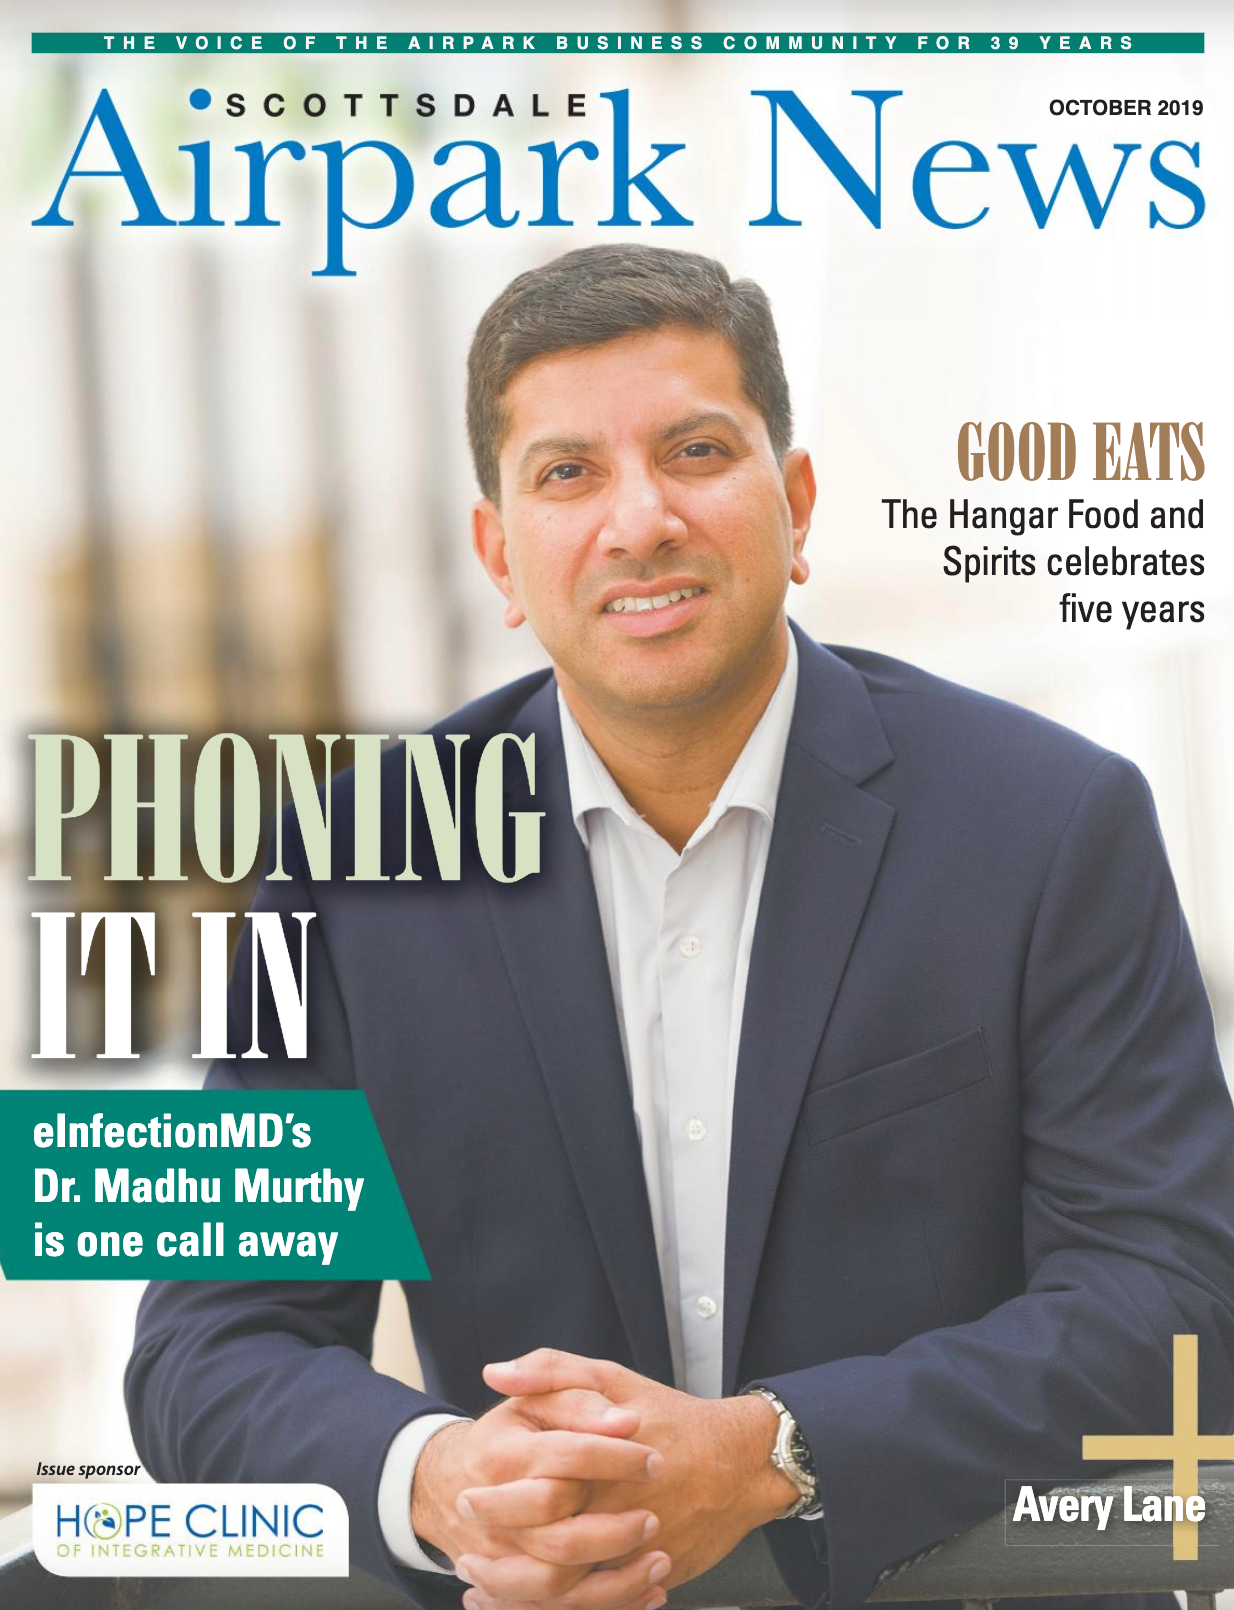 eInfectionMD on the Cover of Scottsdale Airpark News Magazine